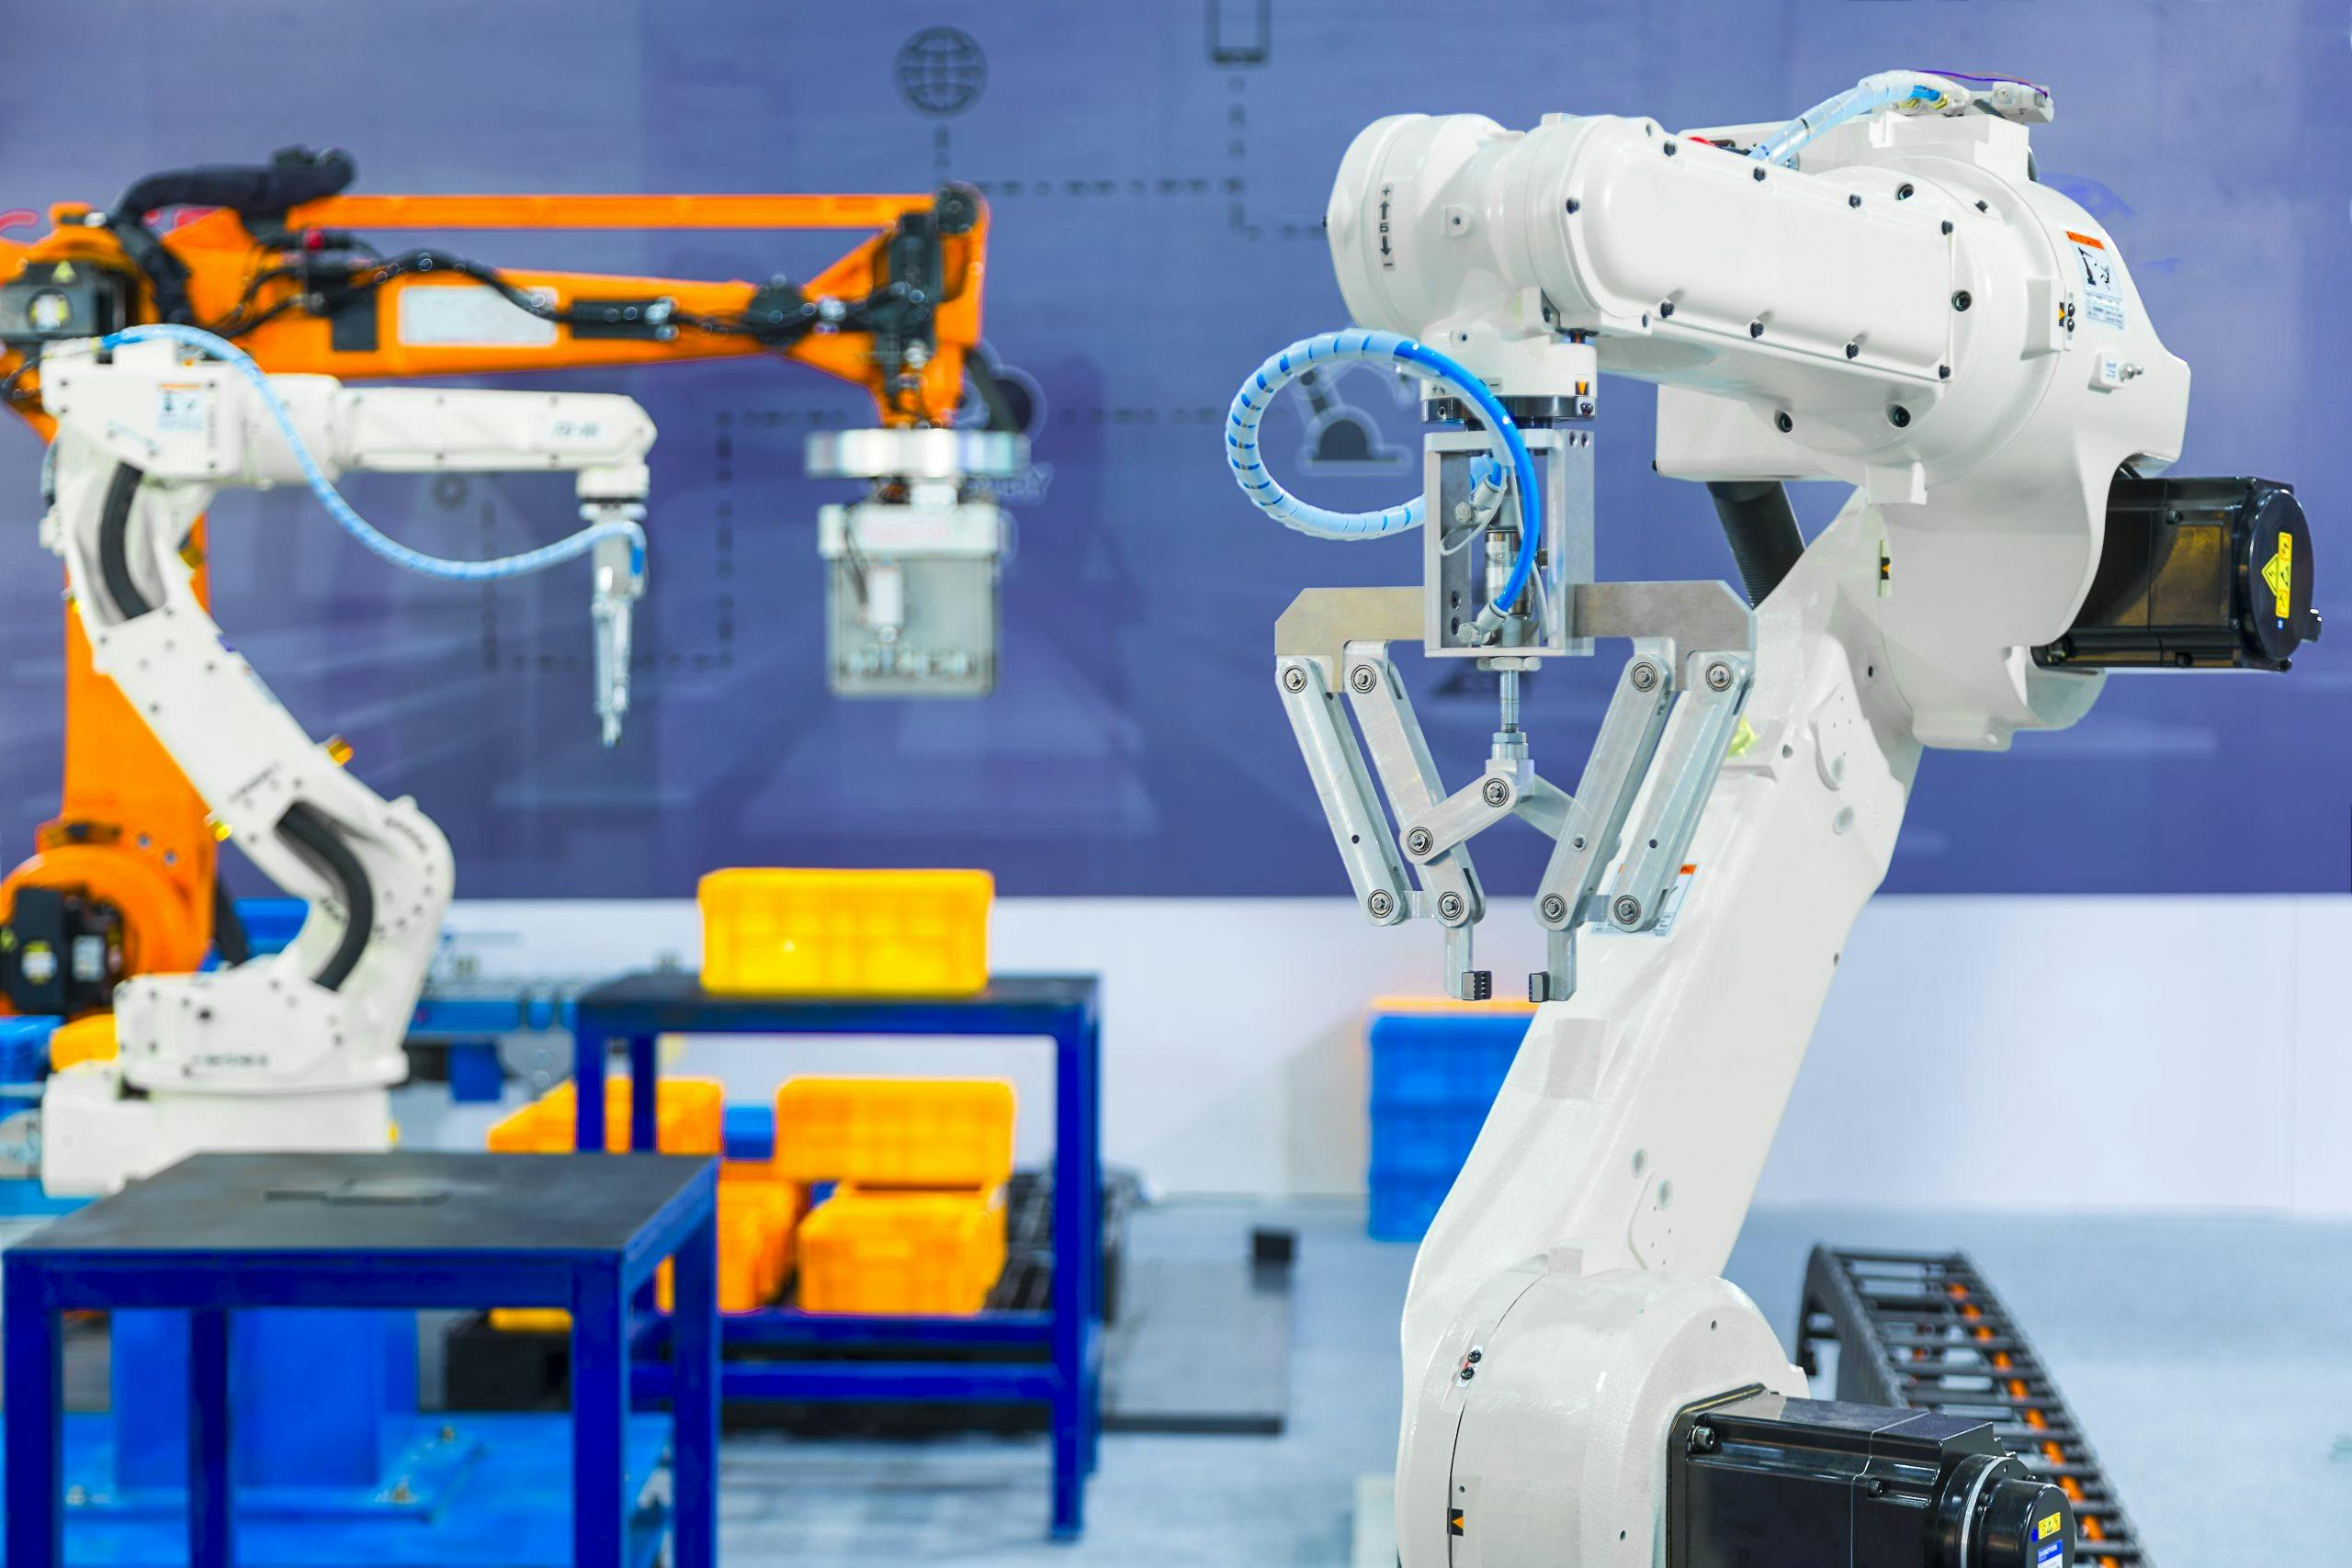 A Short Overview of Industrial Robots